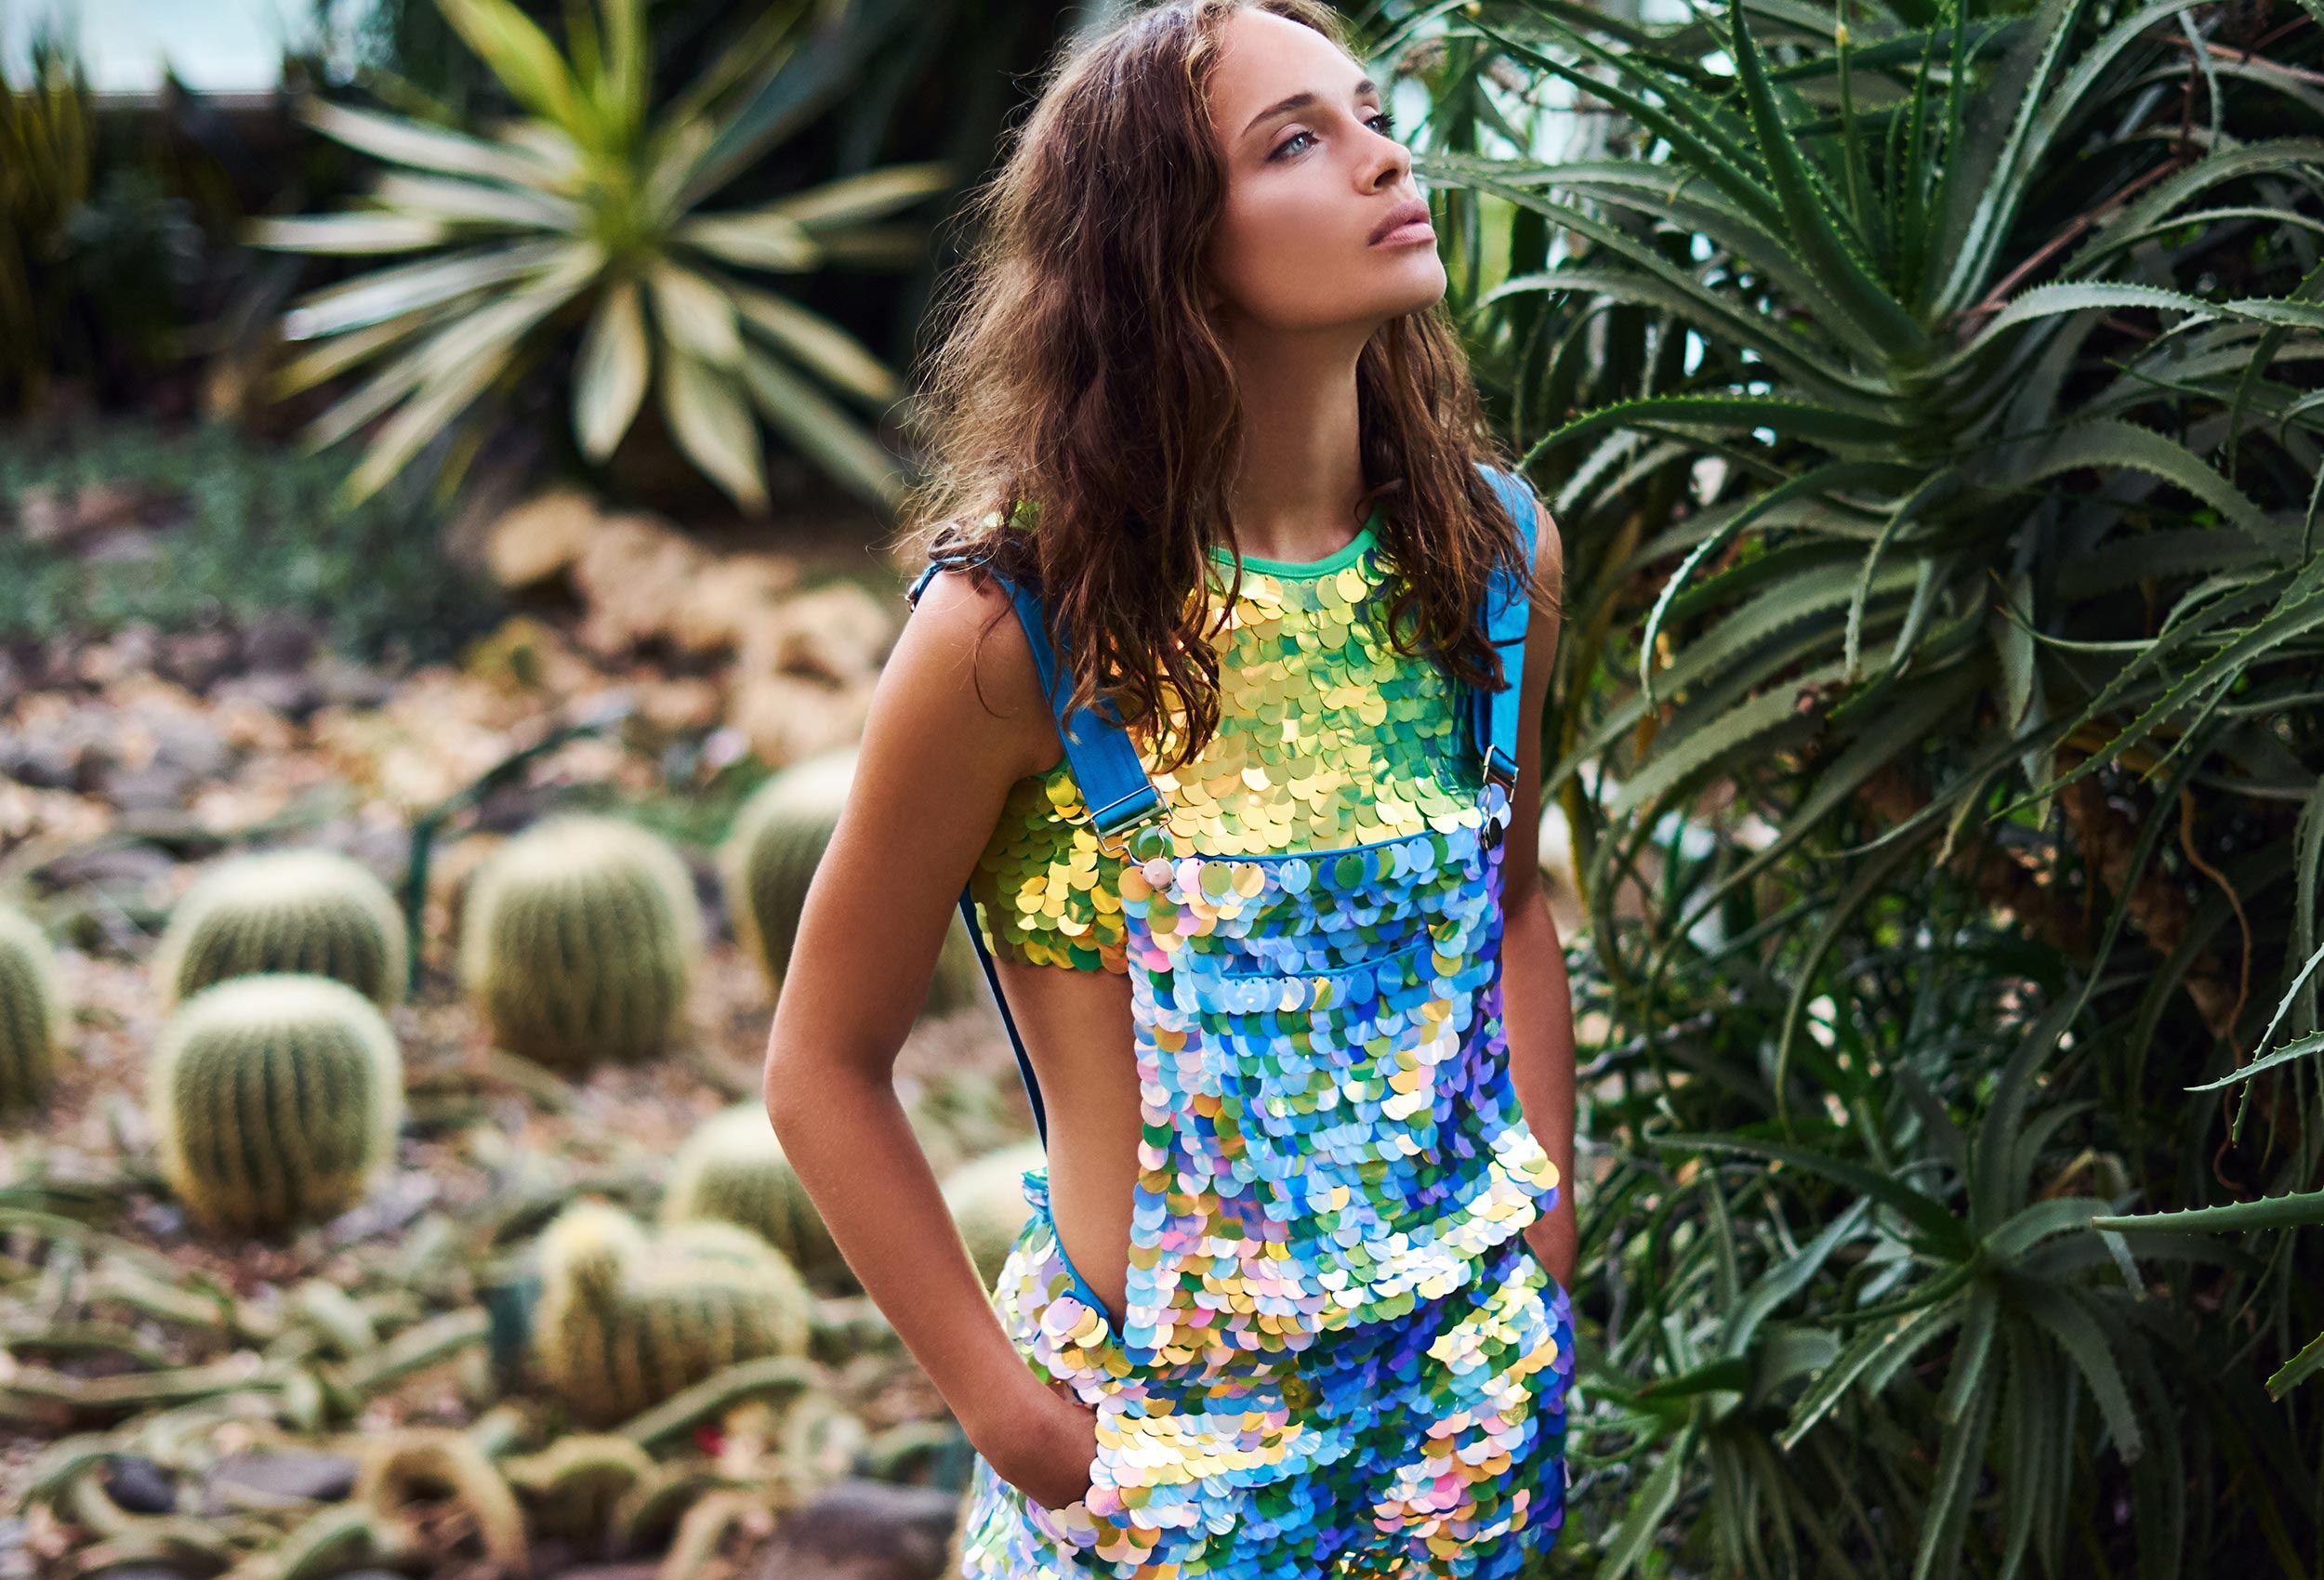 woman wearing dungaree shorts and a crop top covered in large round iridescent green and blue sequins standing in an old glasshouse surrounded by foliage